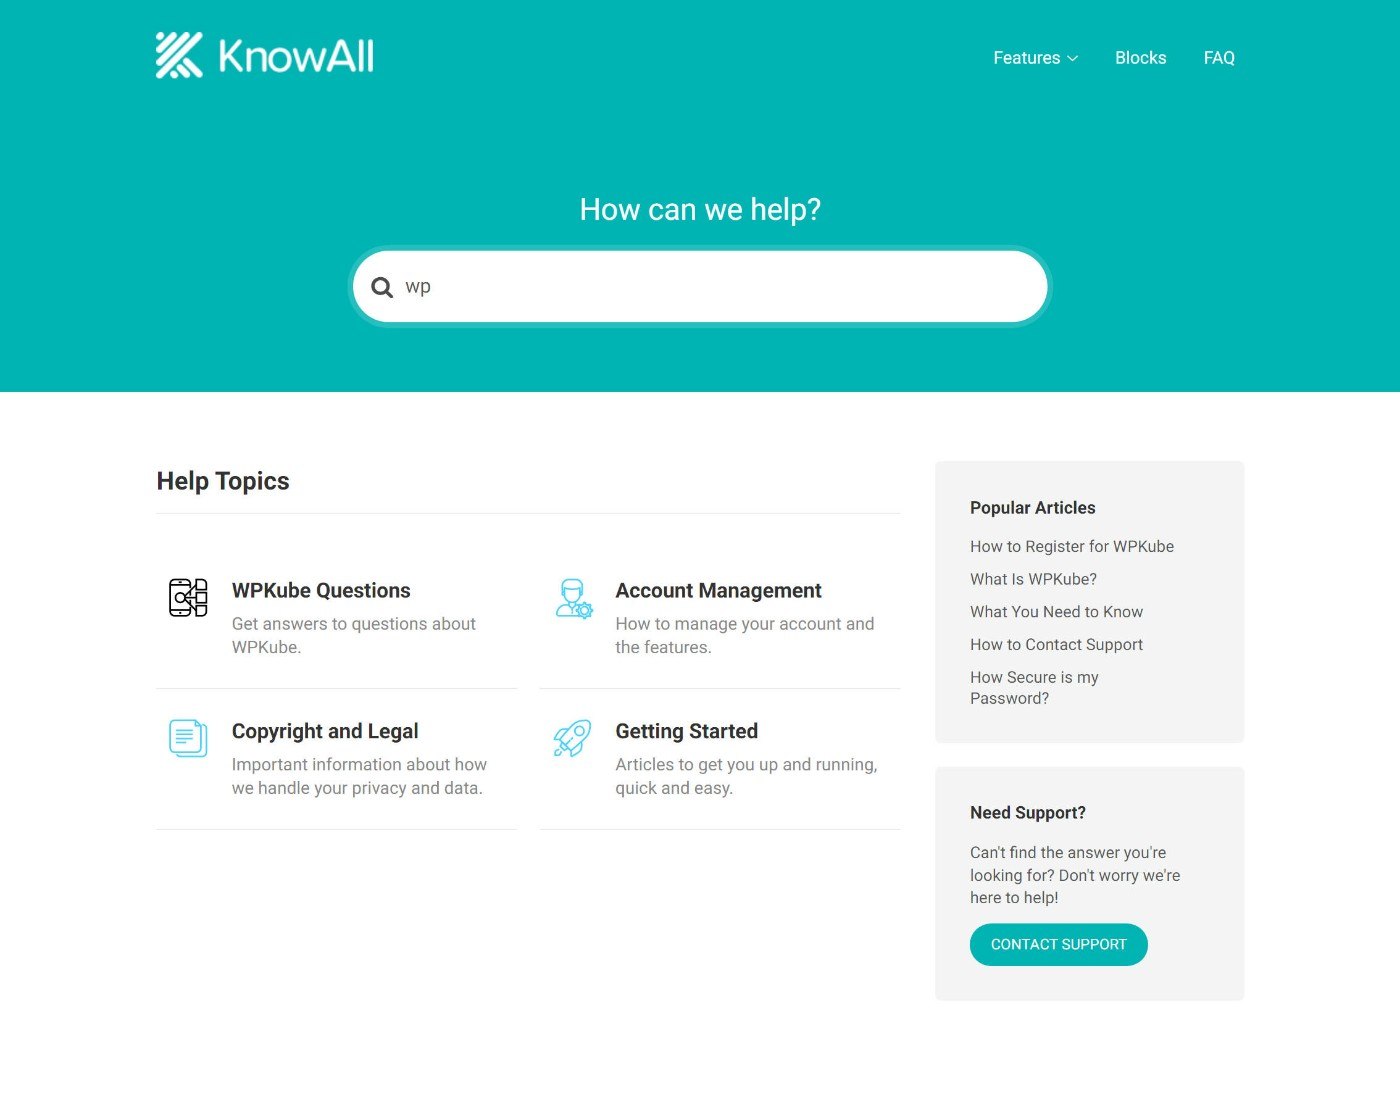 KnowAll design